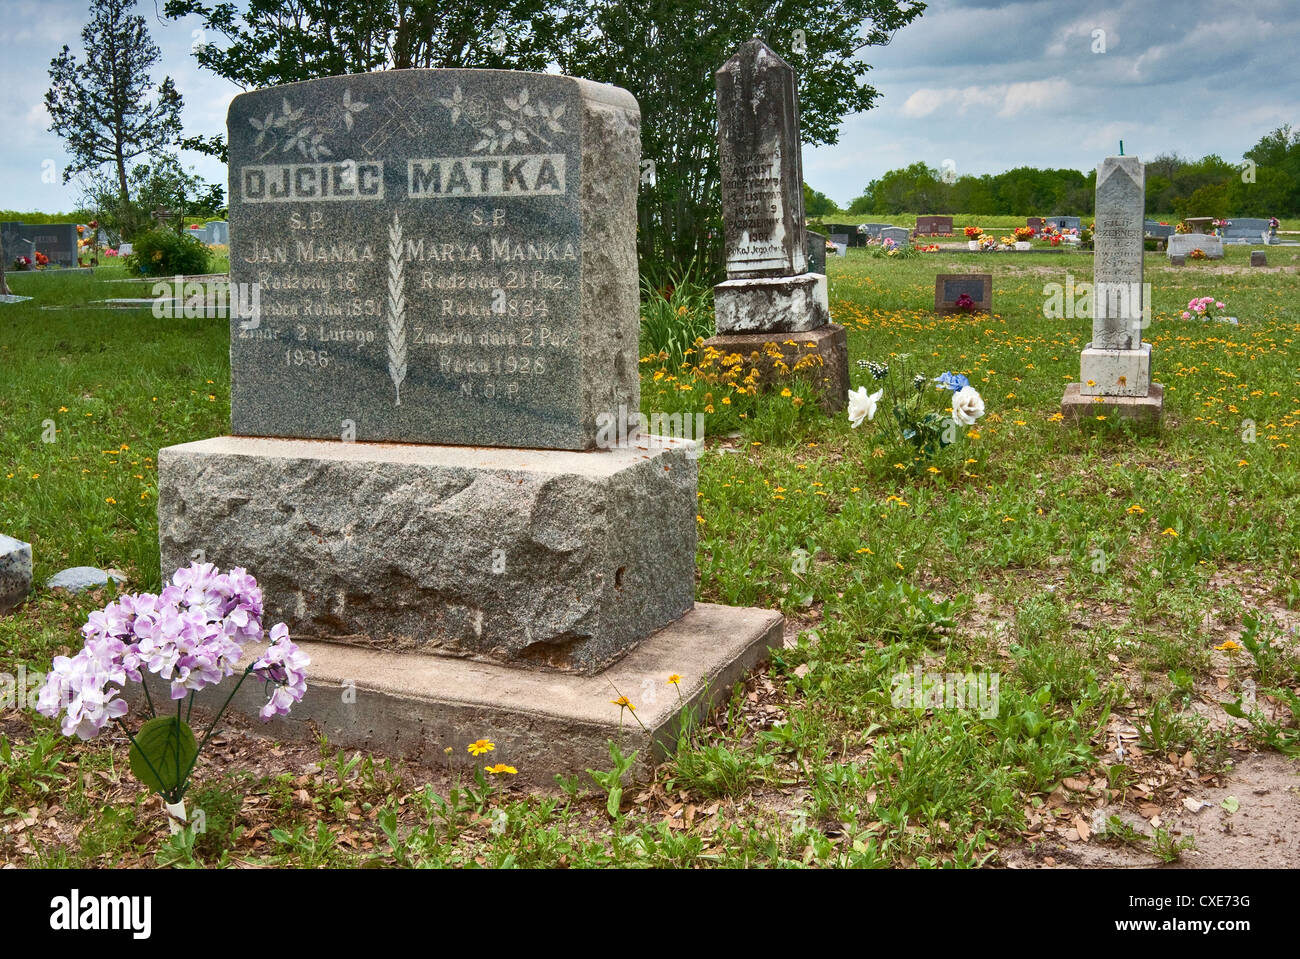 Early 20th century tombstones with Polish inscriptions at cemetery in Panna Maria, Texas, the oldest Polish settlement in the US Stock Photo